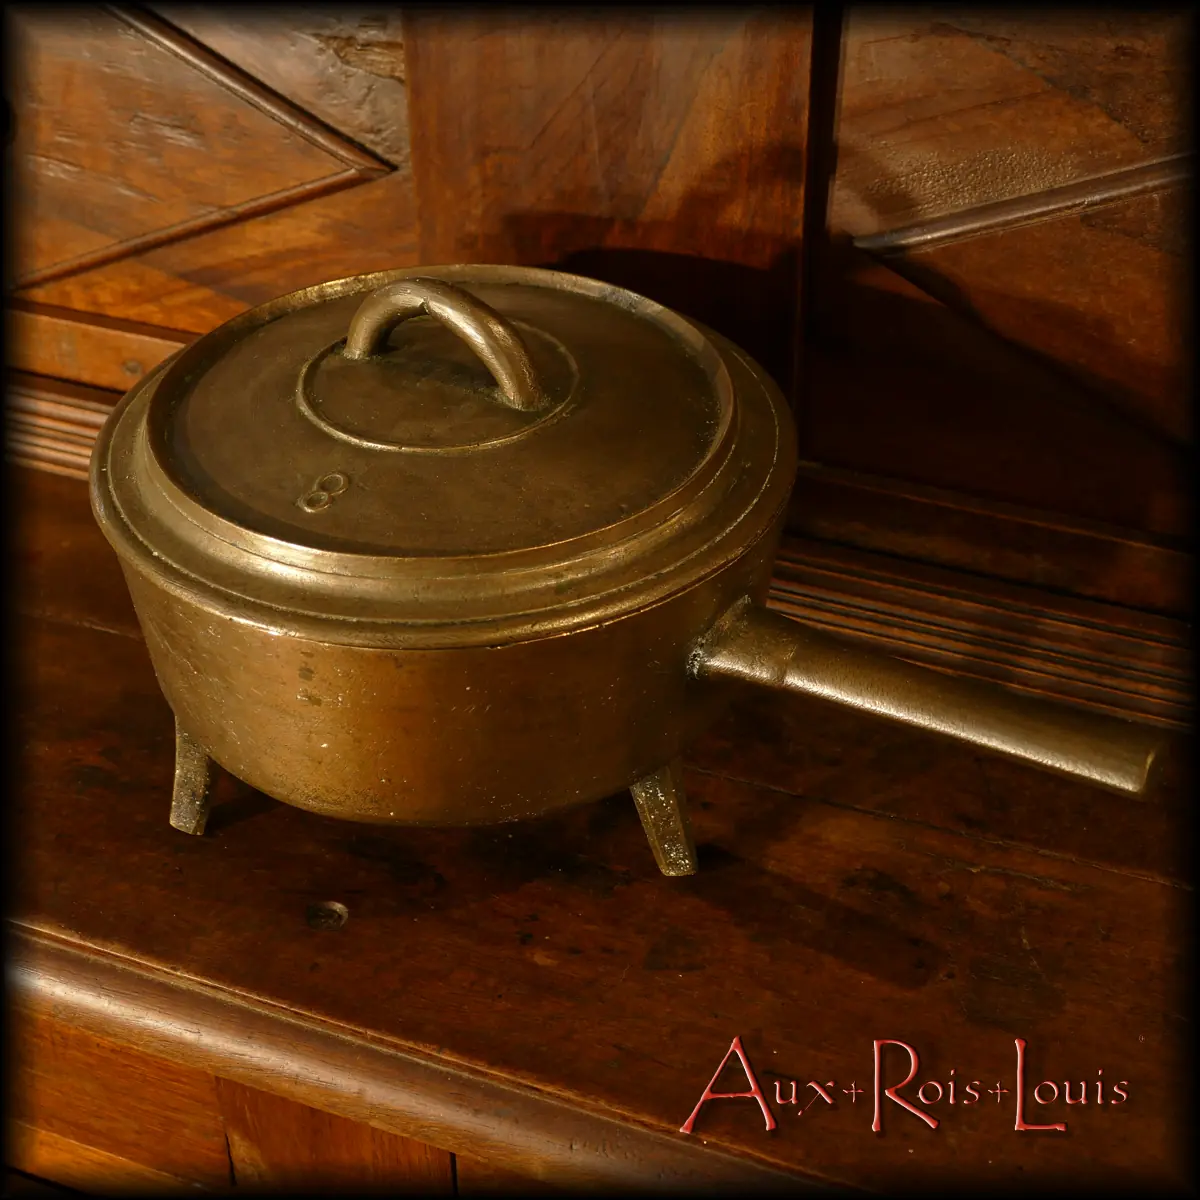 Here is a pie dish that has the particularity of being cast right after a church bell, in order not to waste any of the molten metal. Therefore, it is made of the same bronze and can be considered the little sister of a bell, just a few minutes apart, though not an exact twin.